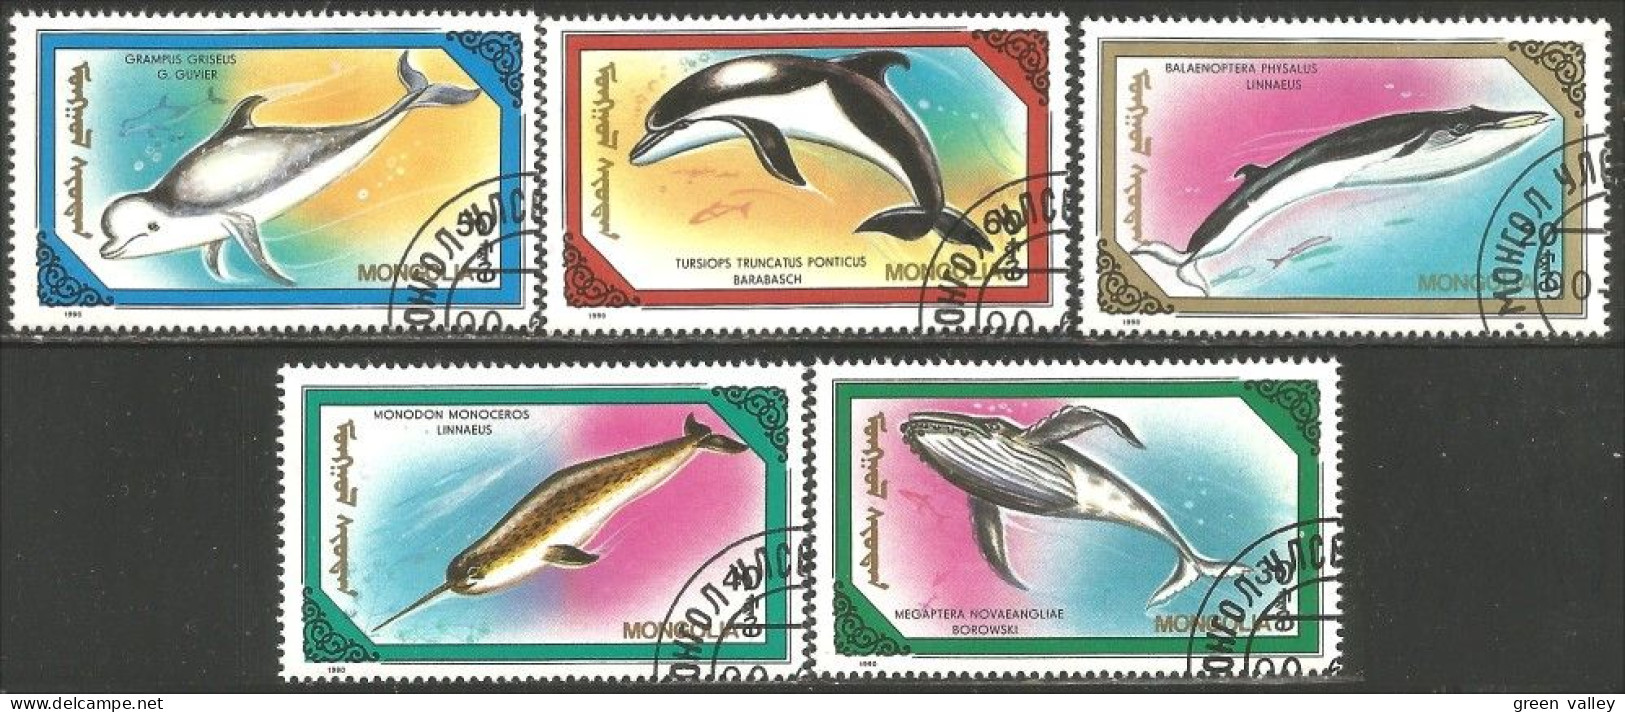 620 Mongolie Baleines Whales Cachalots Balena Capodoglio Ballena Wal Pottwal Dauphins Dolphins Delphin (MNG-76) - Wale